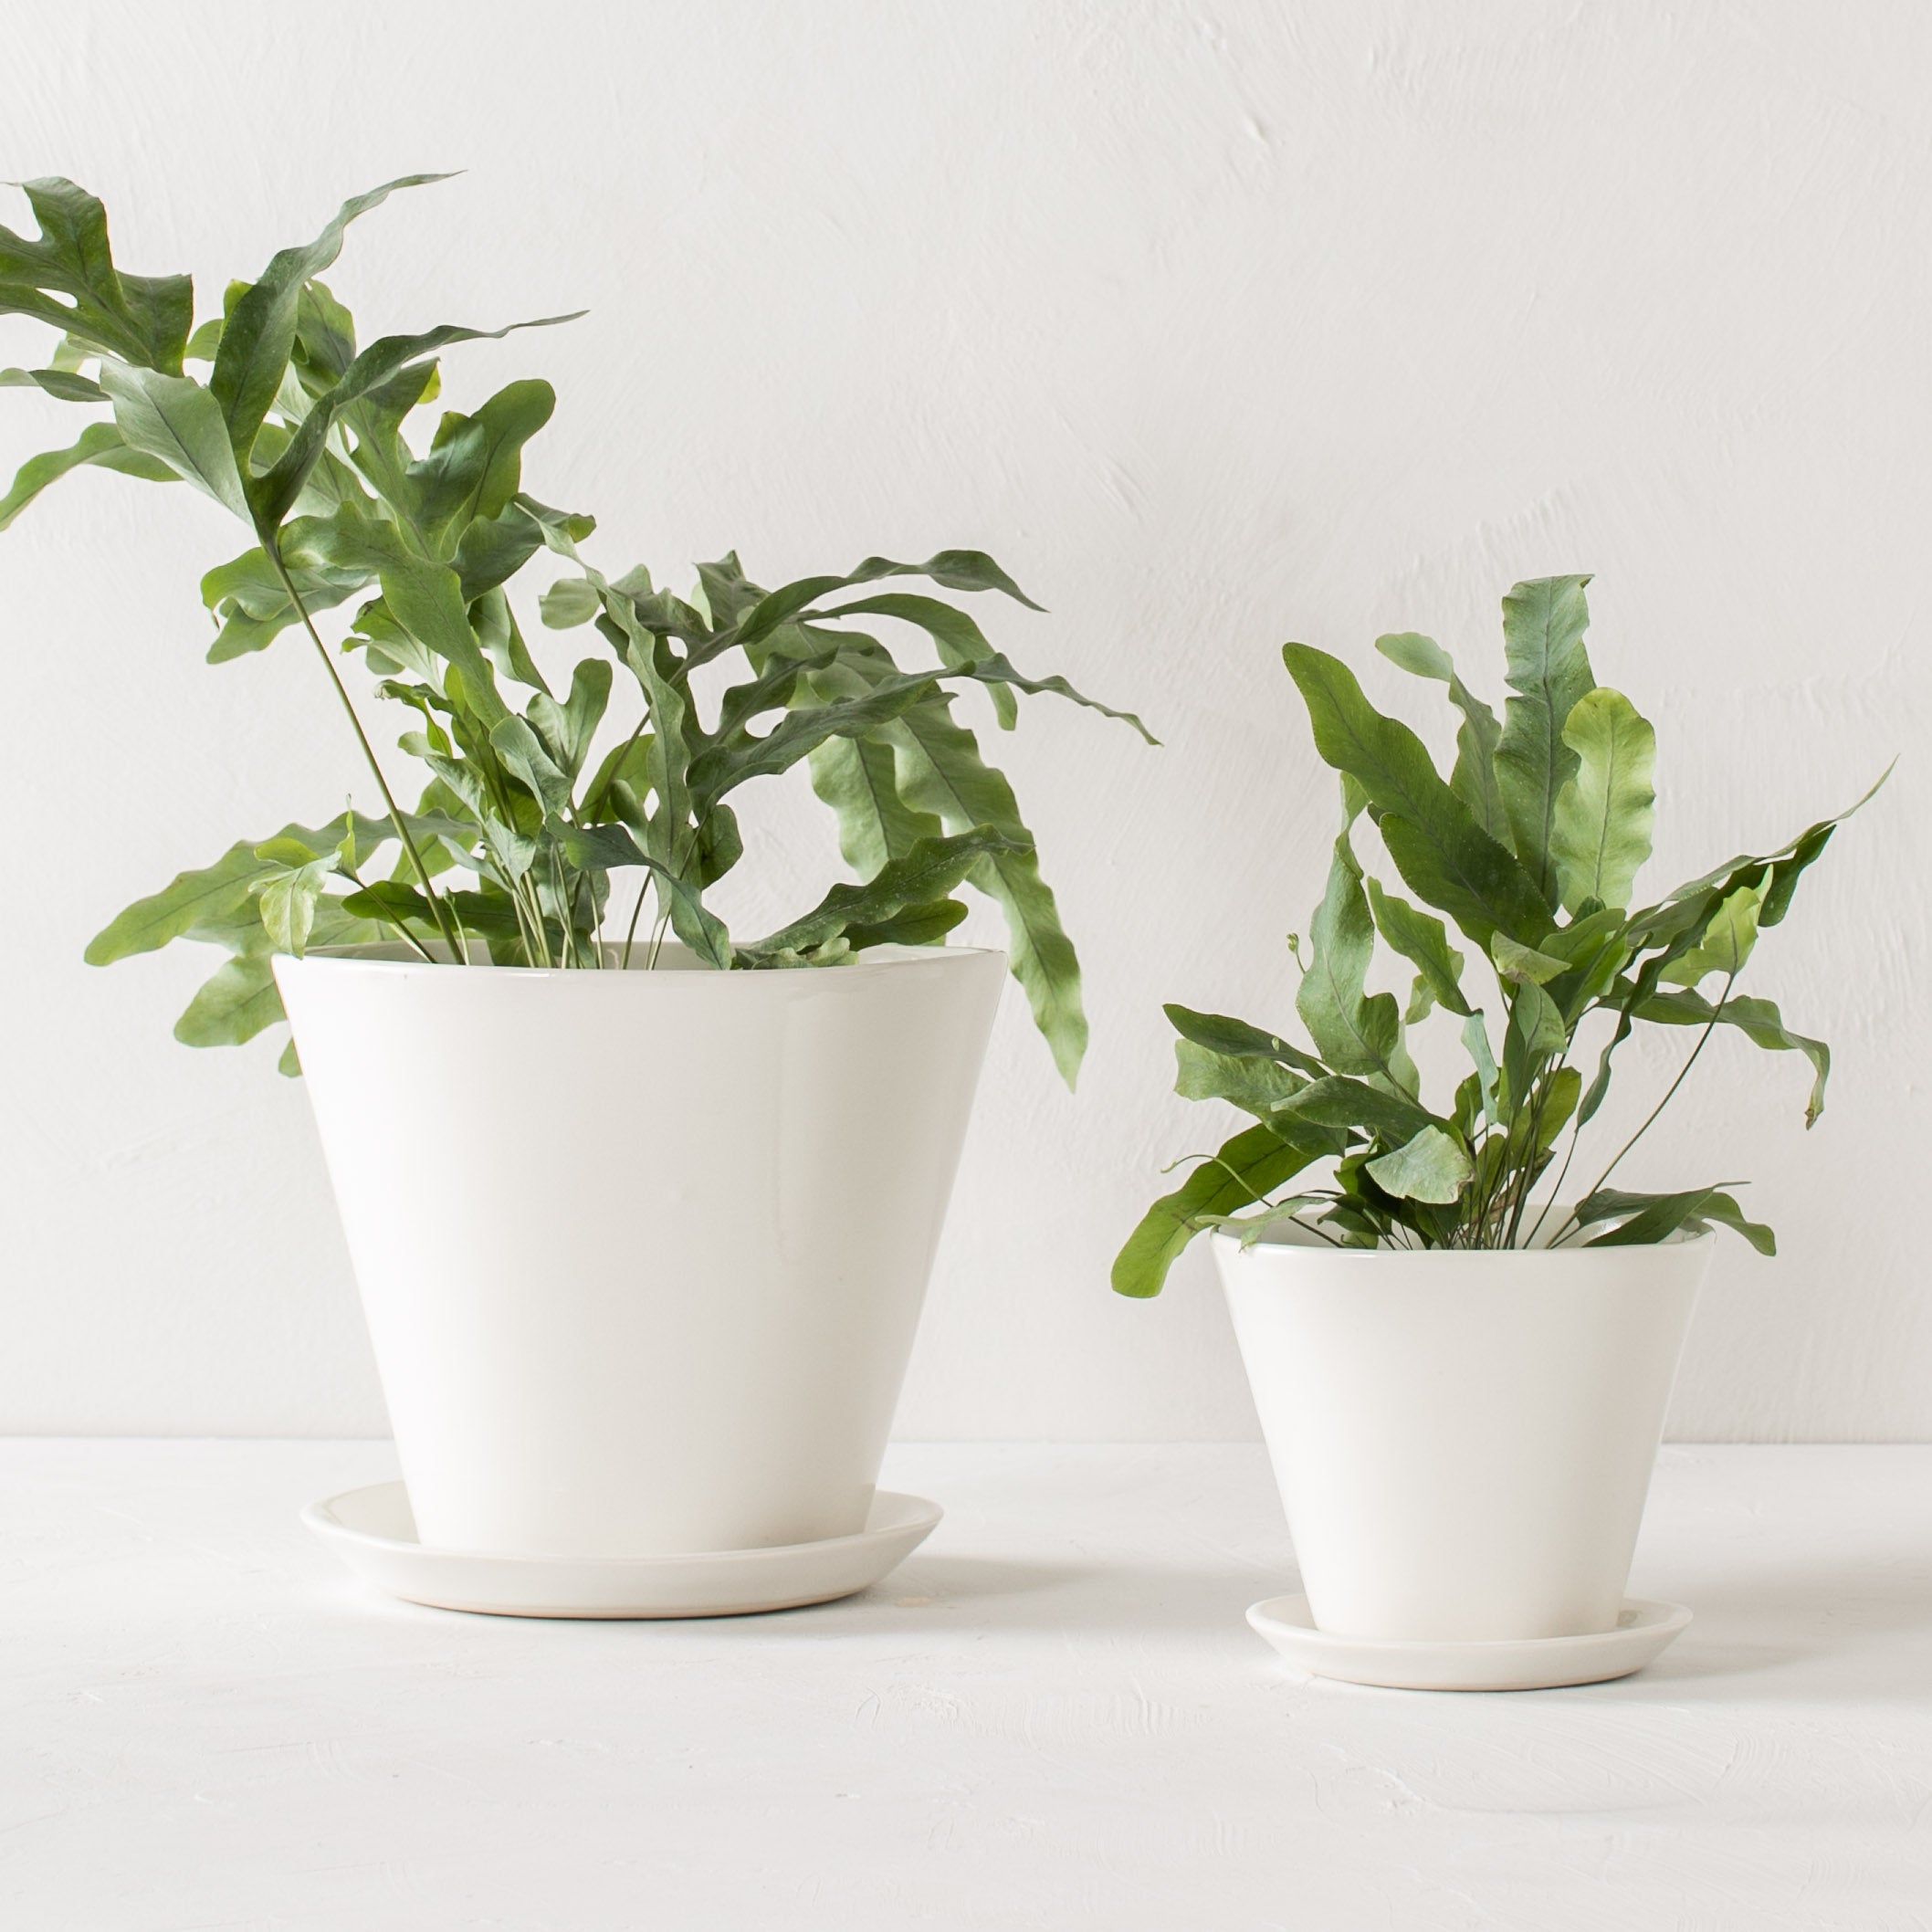 Two white tapered ceramic planter side by side. One larger (7 inches) the other smaller (4 inches ). Both have bottom drainage dishes. Background is a textured white and the table top mimics the wall design. Designed and sold by Convivial Production, Kansas City Ceramics.